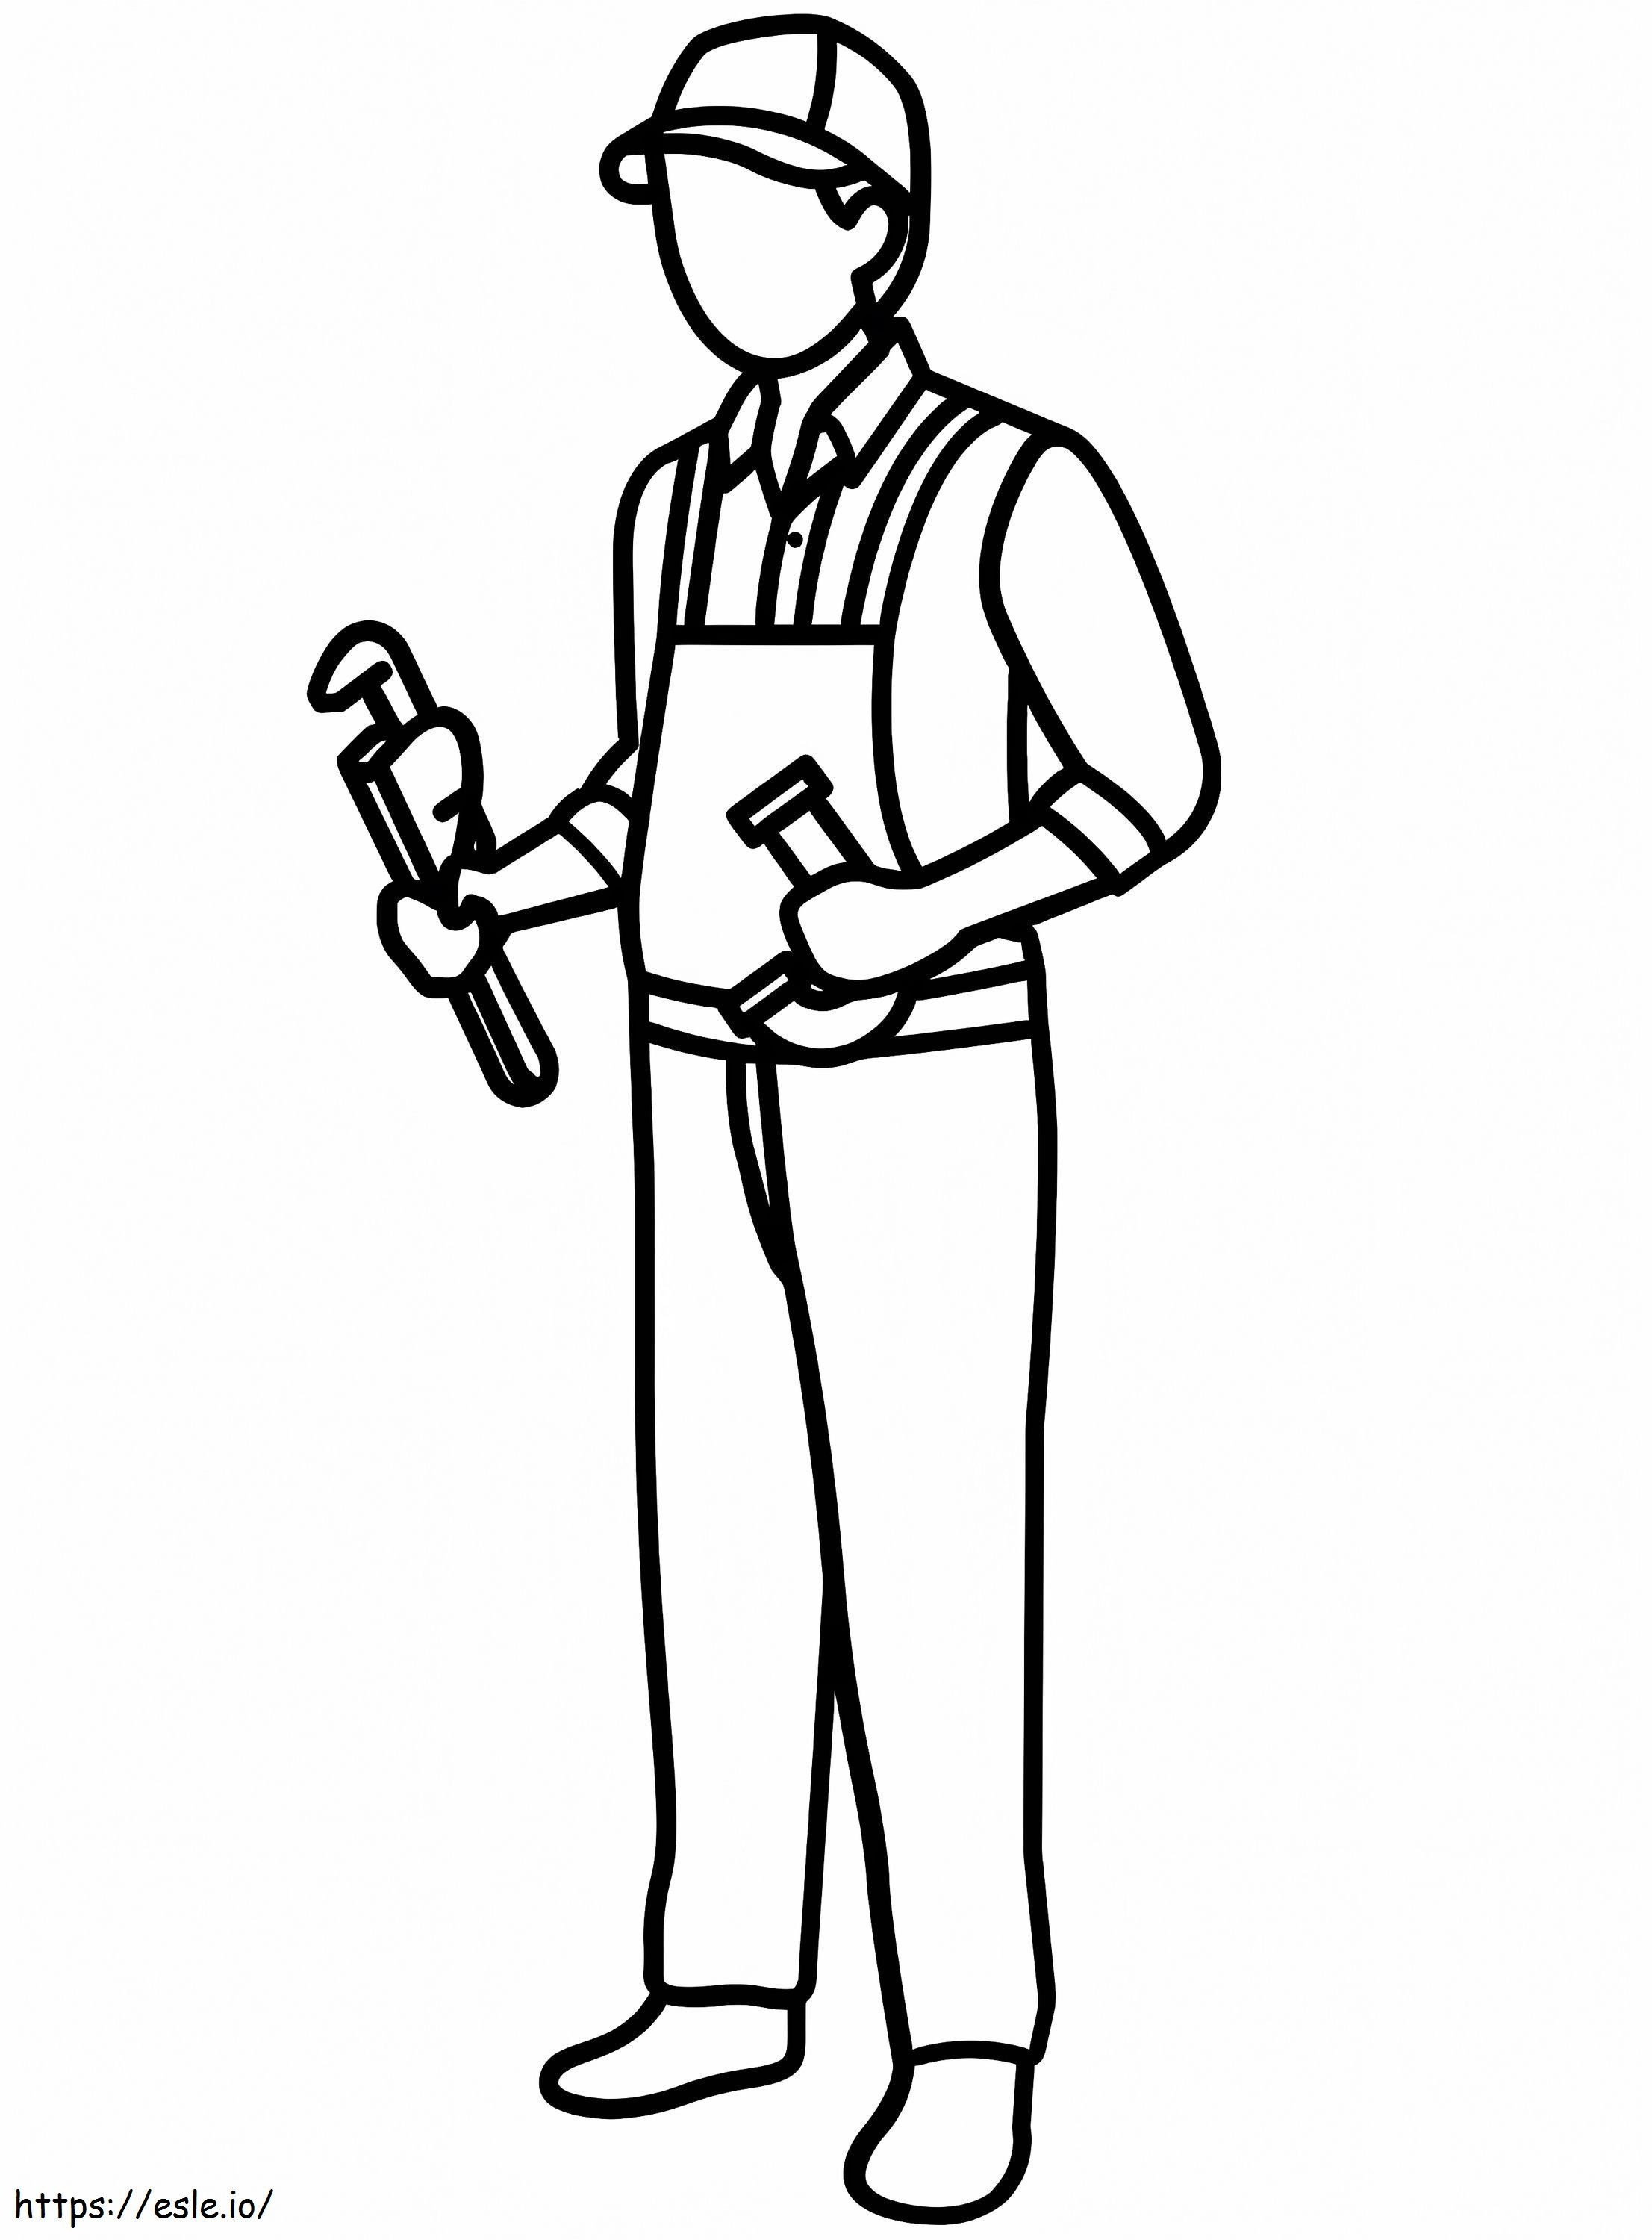 Plumber 9 coloring page